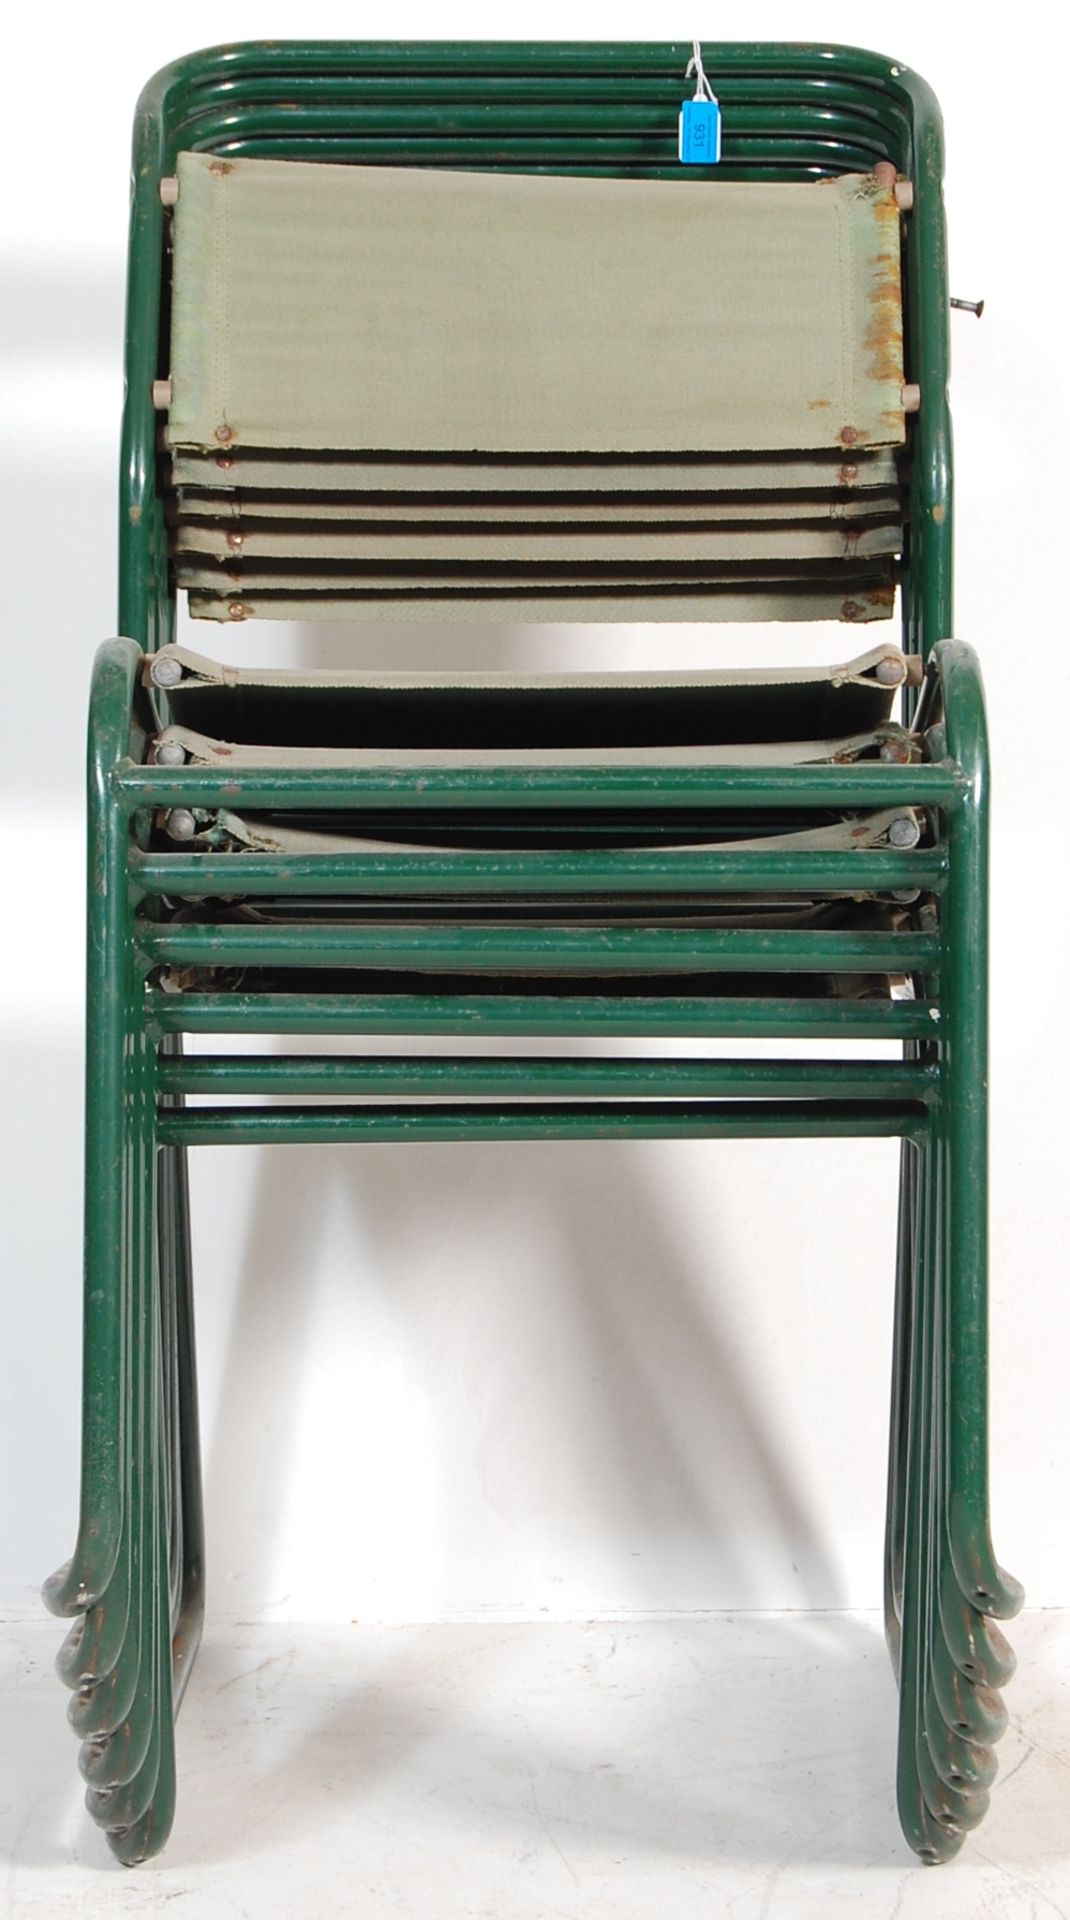 GROUP OF SIX 20TH CENTURY VINTAGE INDUSTRIAL RETRO VINTAGE TUBULAR FRAMED CHAIRS - Image 2 of 5